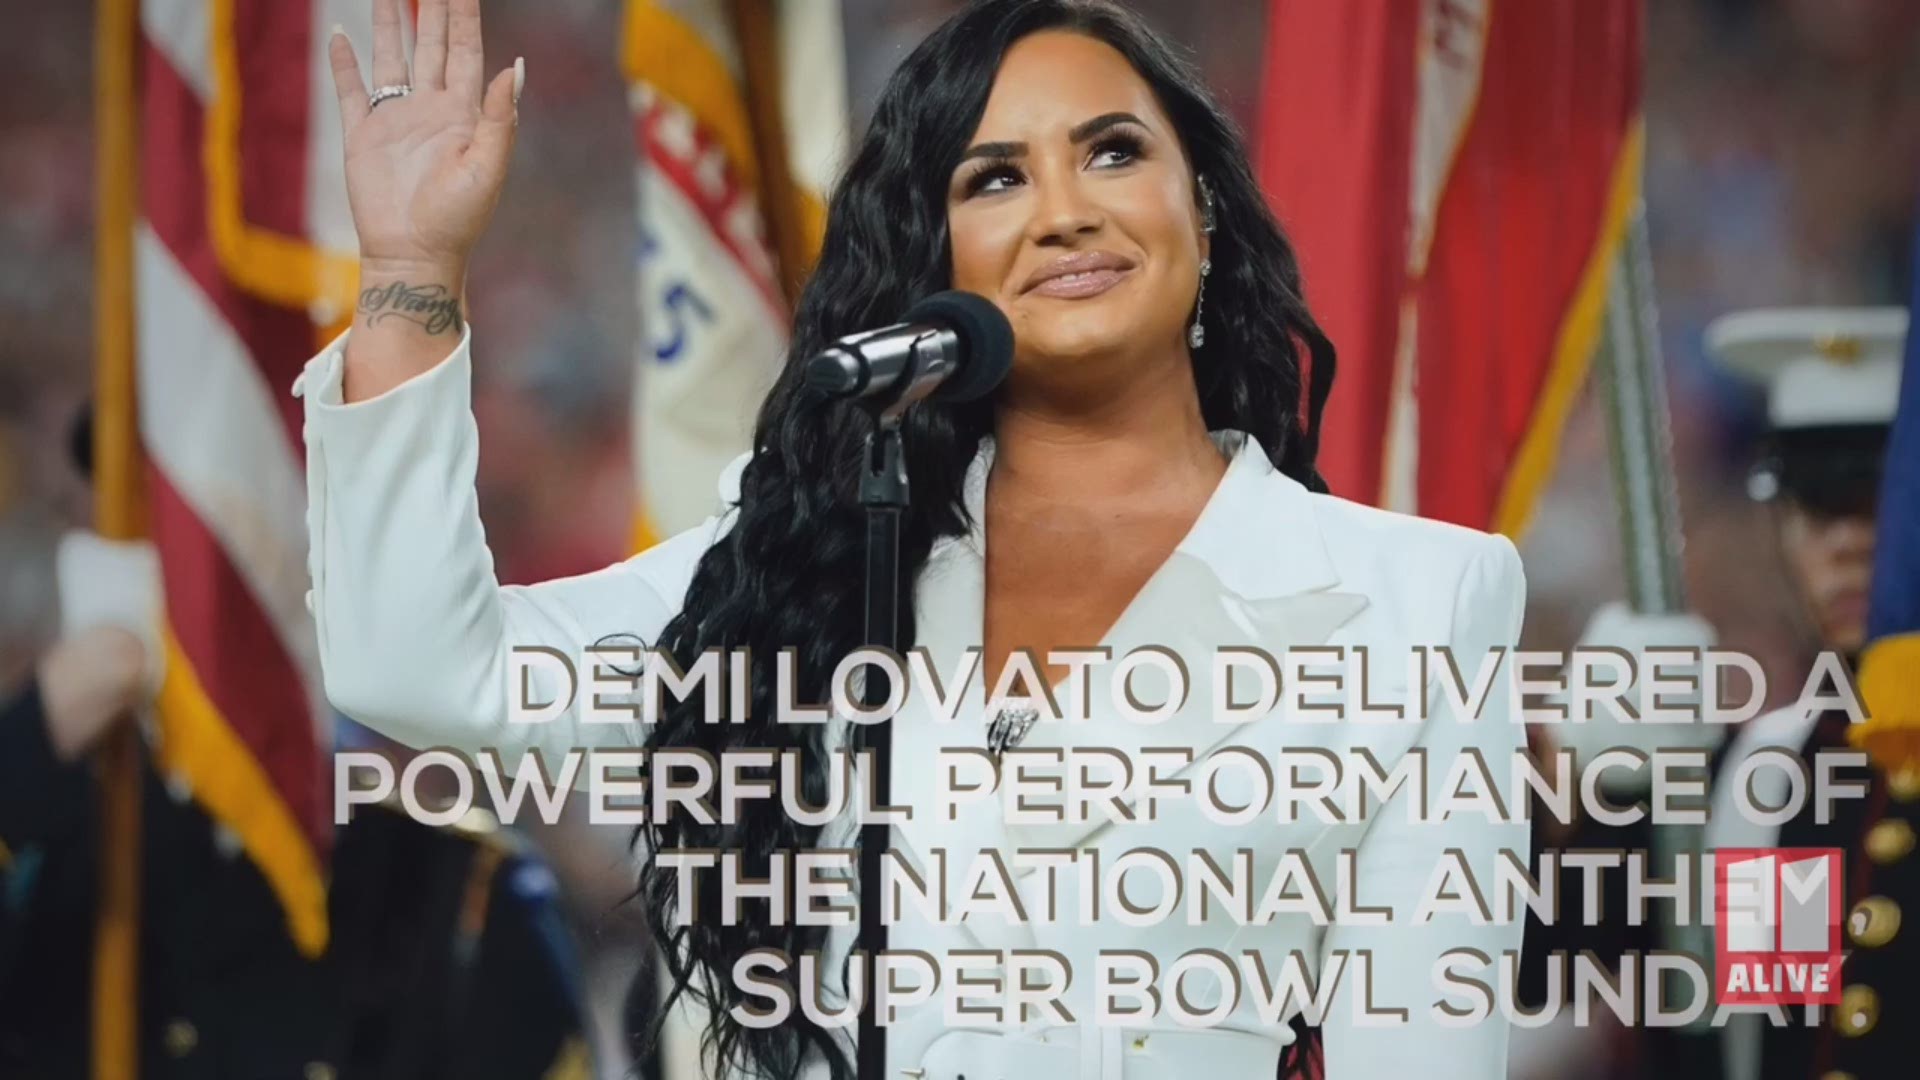 The singer belted out a perfect rendition of the anthem before kickoff. The performance comes just a week after an emotional performance at the Grammy Awards.